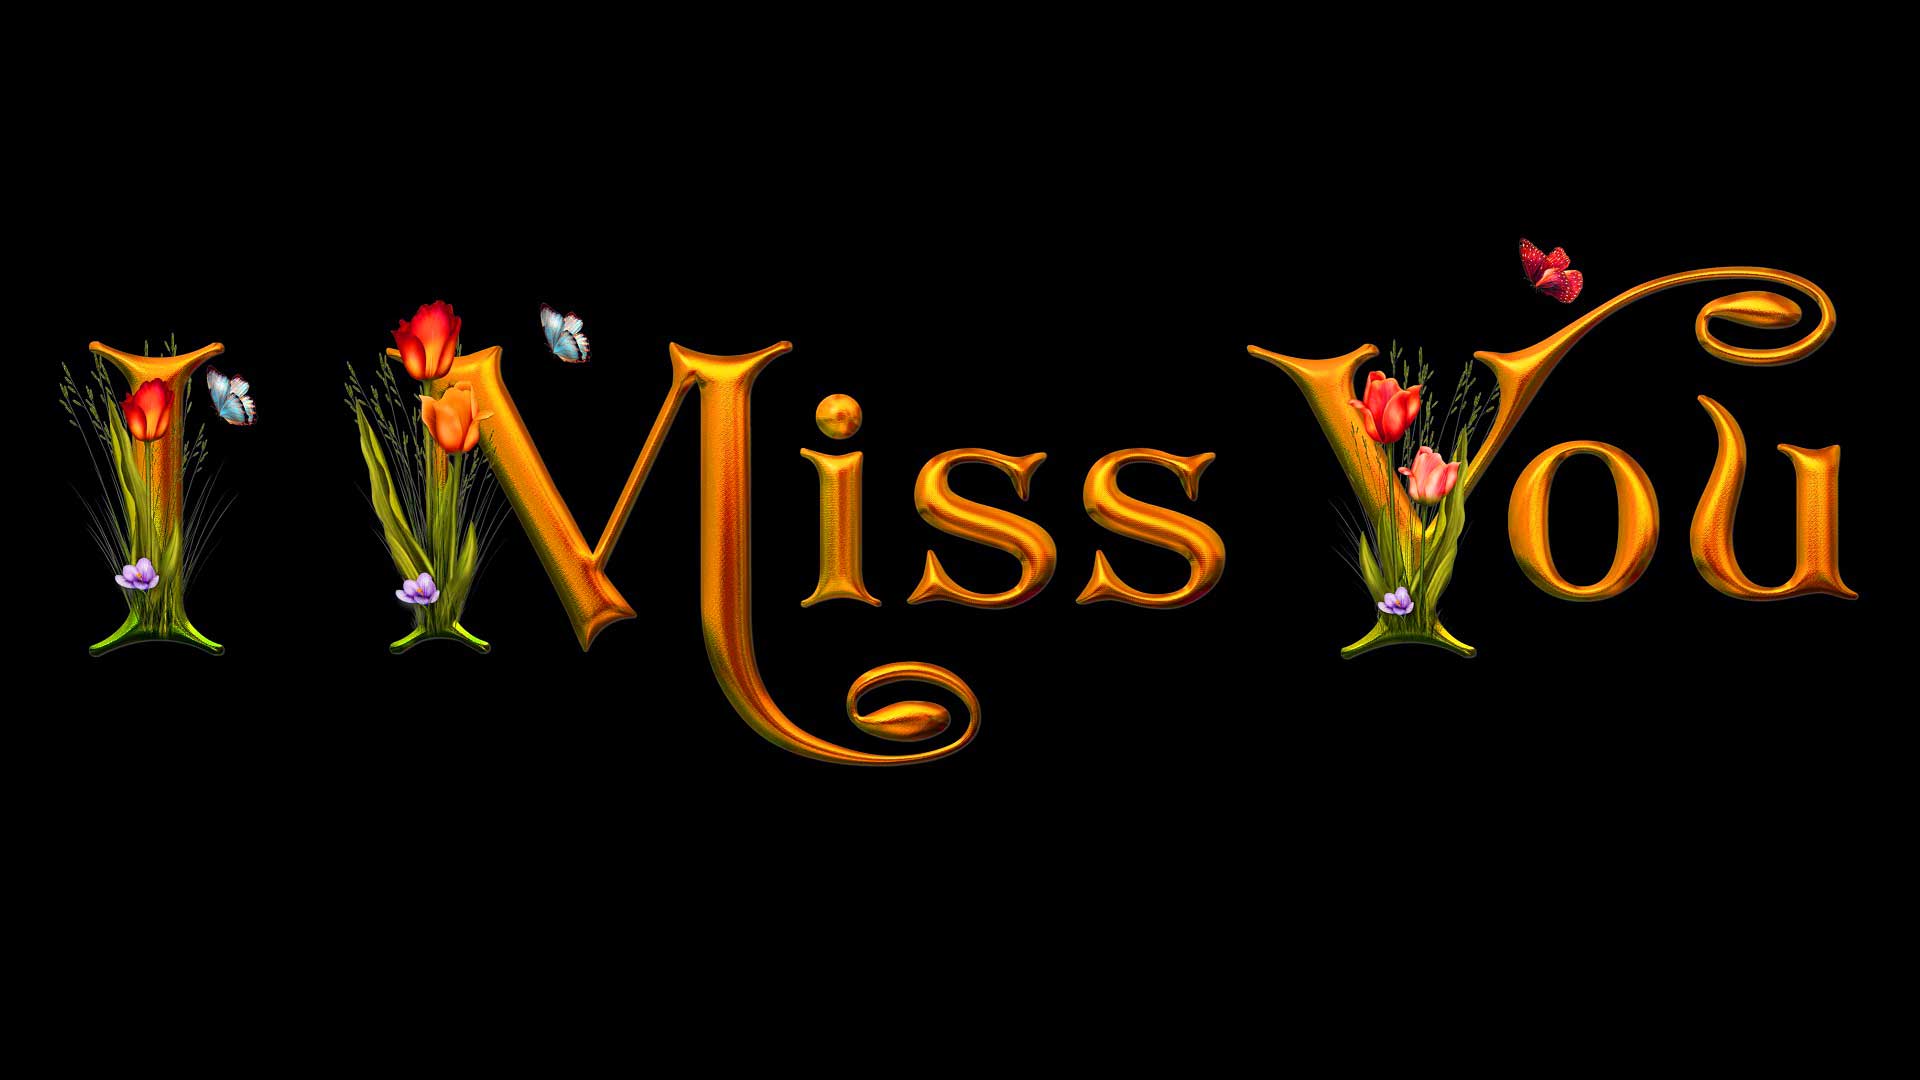 I Miss You u Photo Pics Image Wallpaper Picture For Love